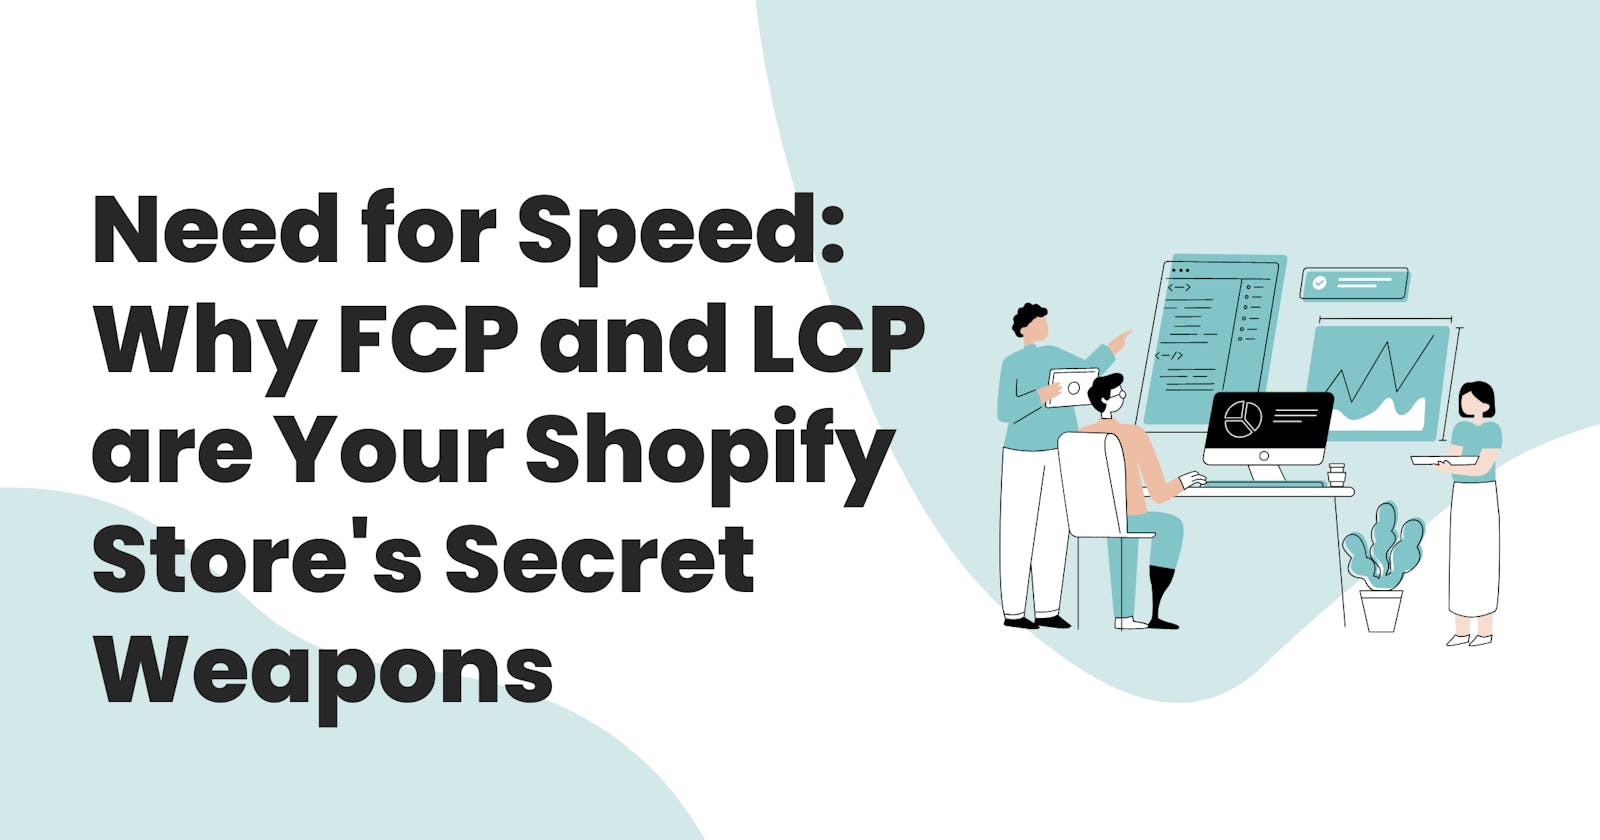 Need for Speed: Why FCP and LCP are Your Shopify Store's Secret Weapons